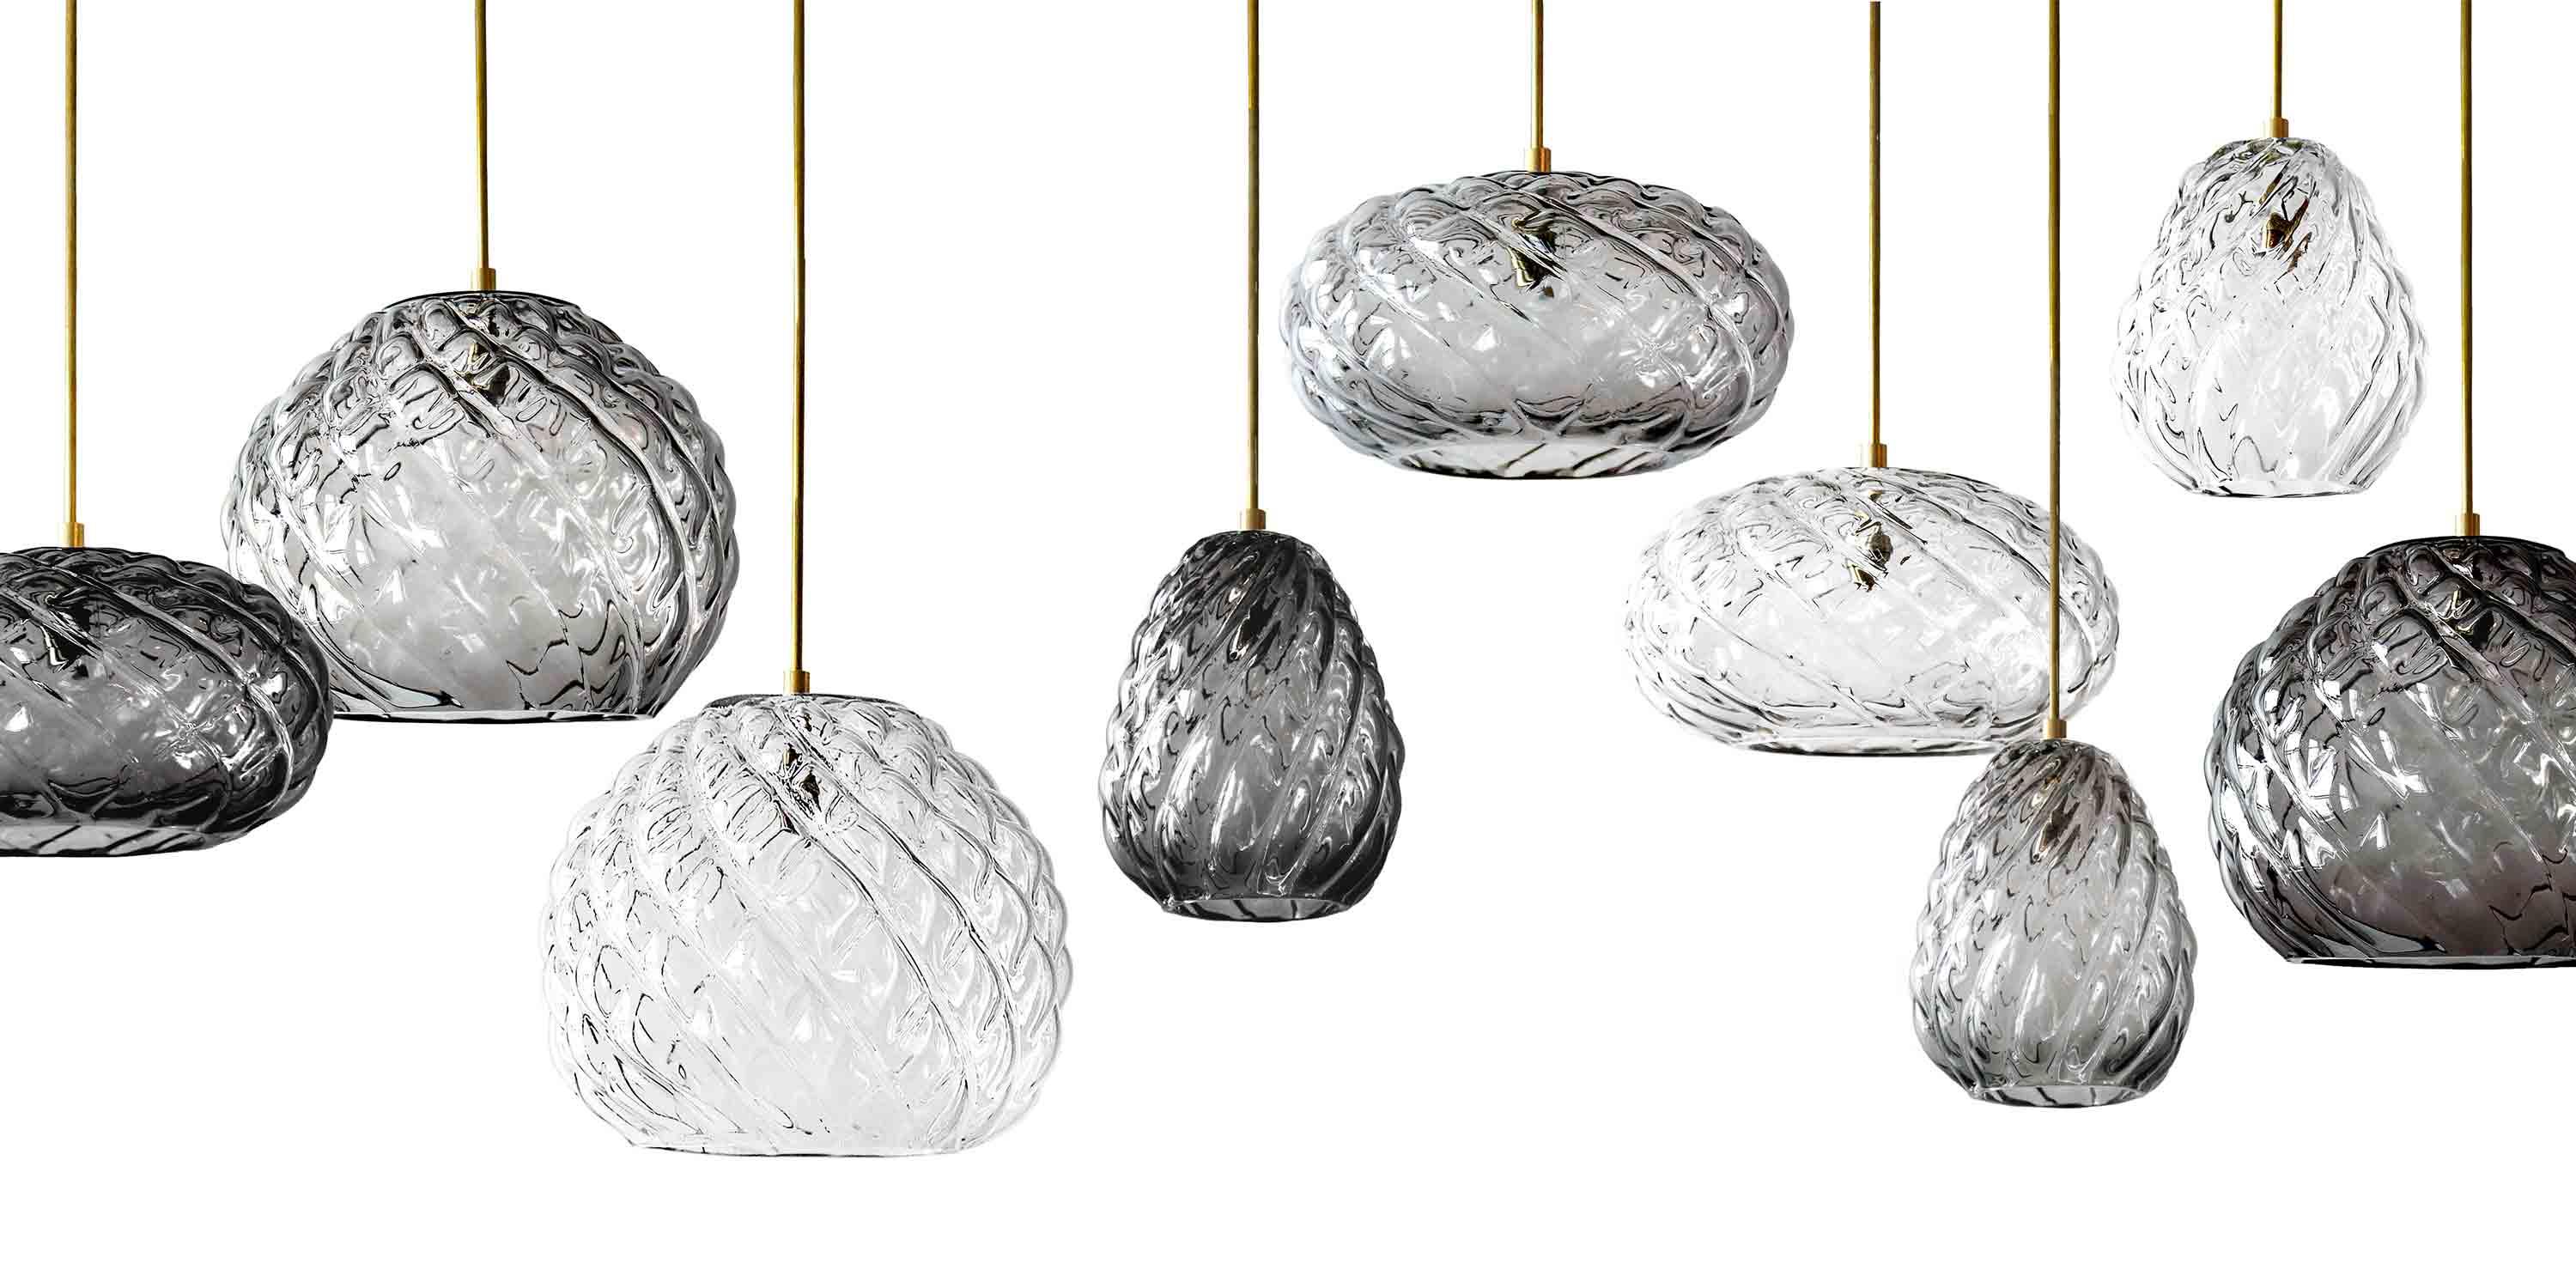 agave lighting collection, handblown glass pendant lights in clear glass, smoke glass, and charcoal glass.